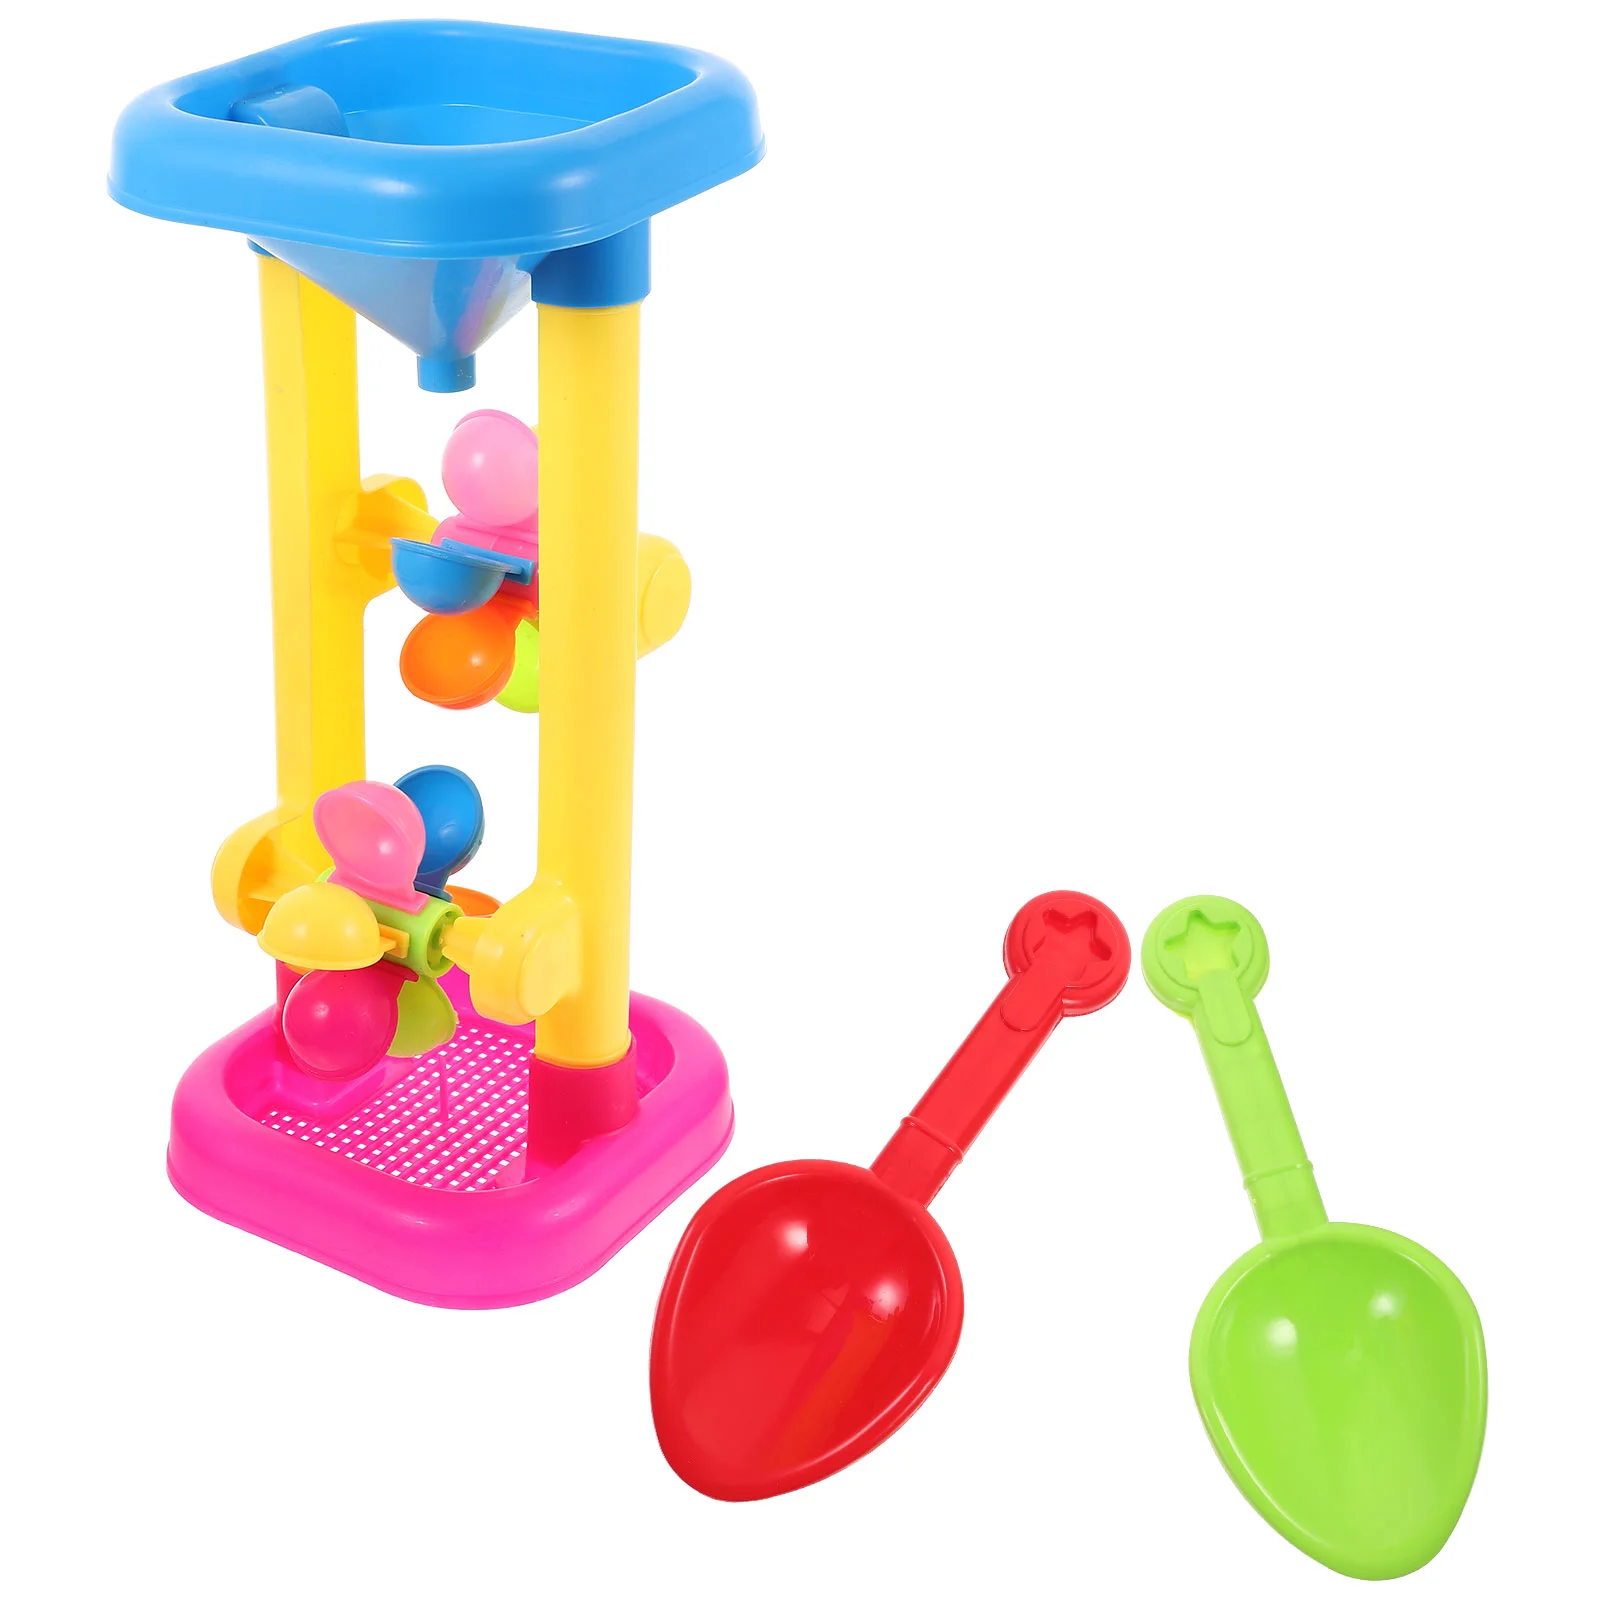 

Hourglass Water Sand Wheel Toy Plastic Sandbox Beach Table Windmill Toddler Toys Outdoor Waterwheel Play